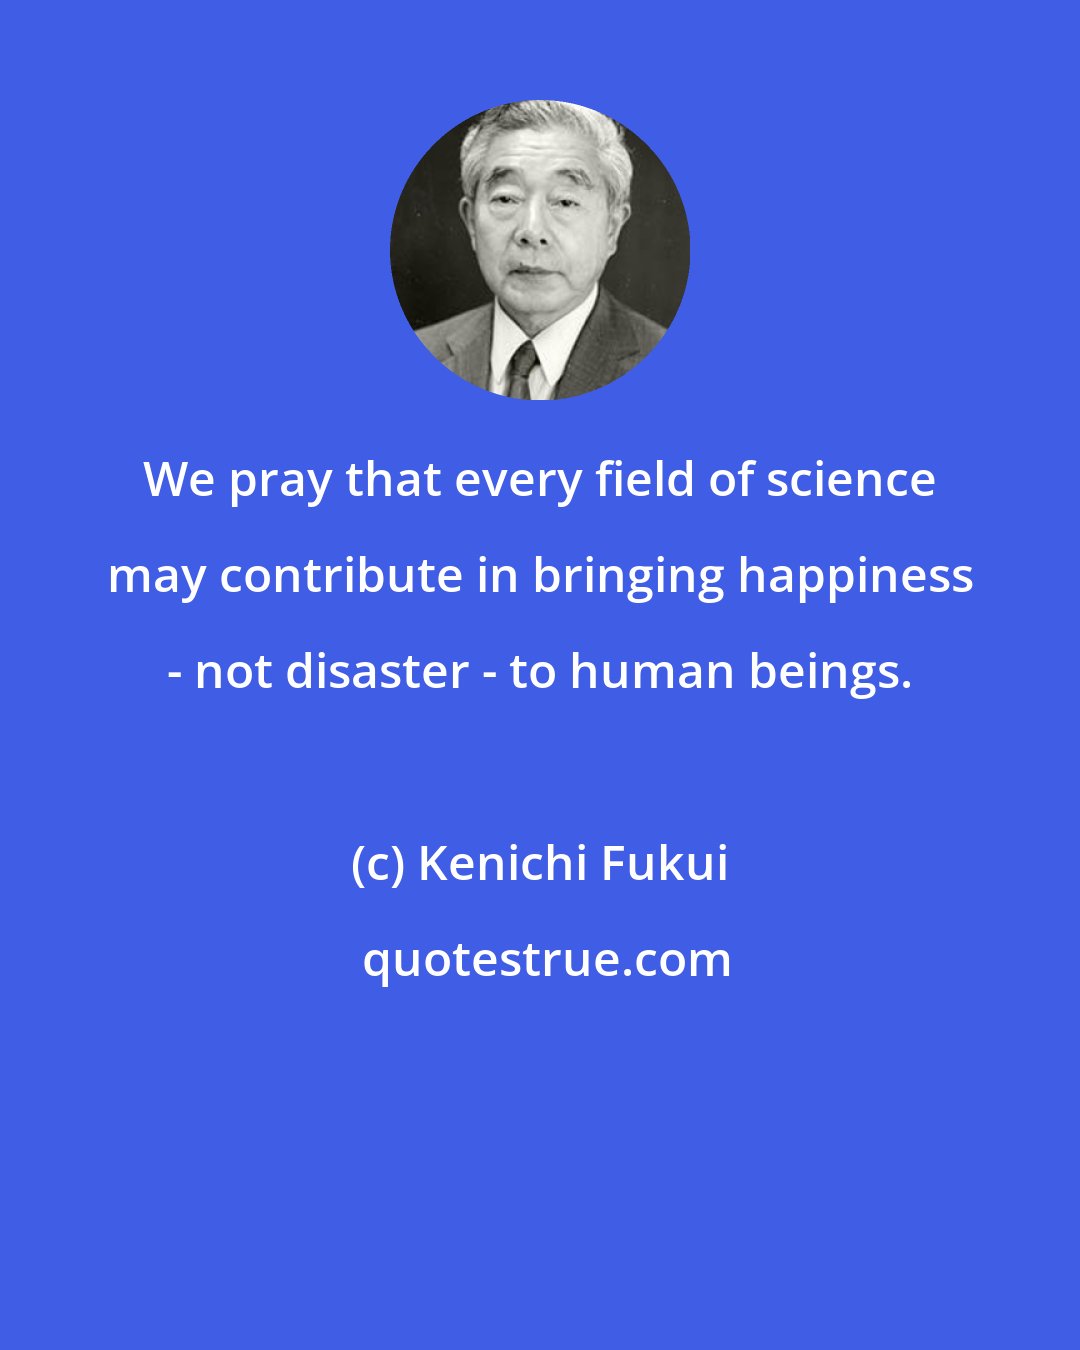 Kenichi Fukui: We pray that every field of science may contribute in bringing happiness - not disaster - to human beings.